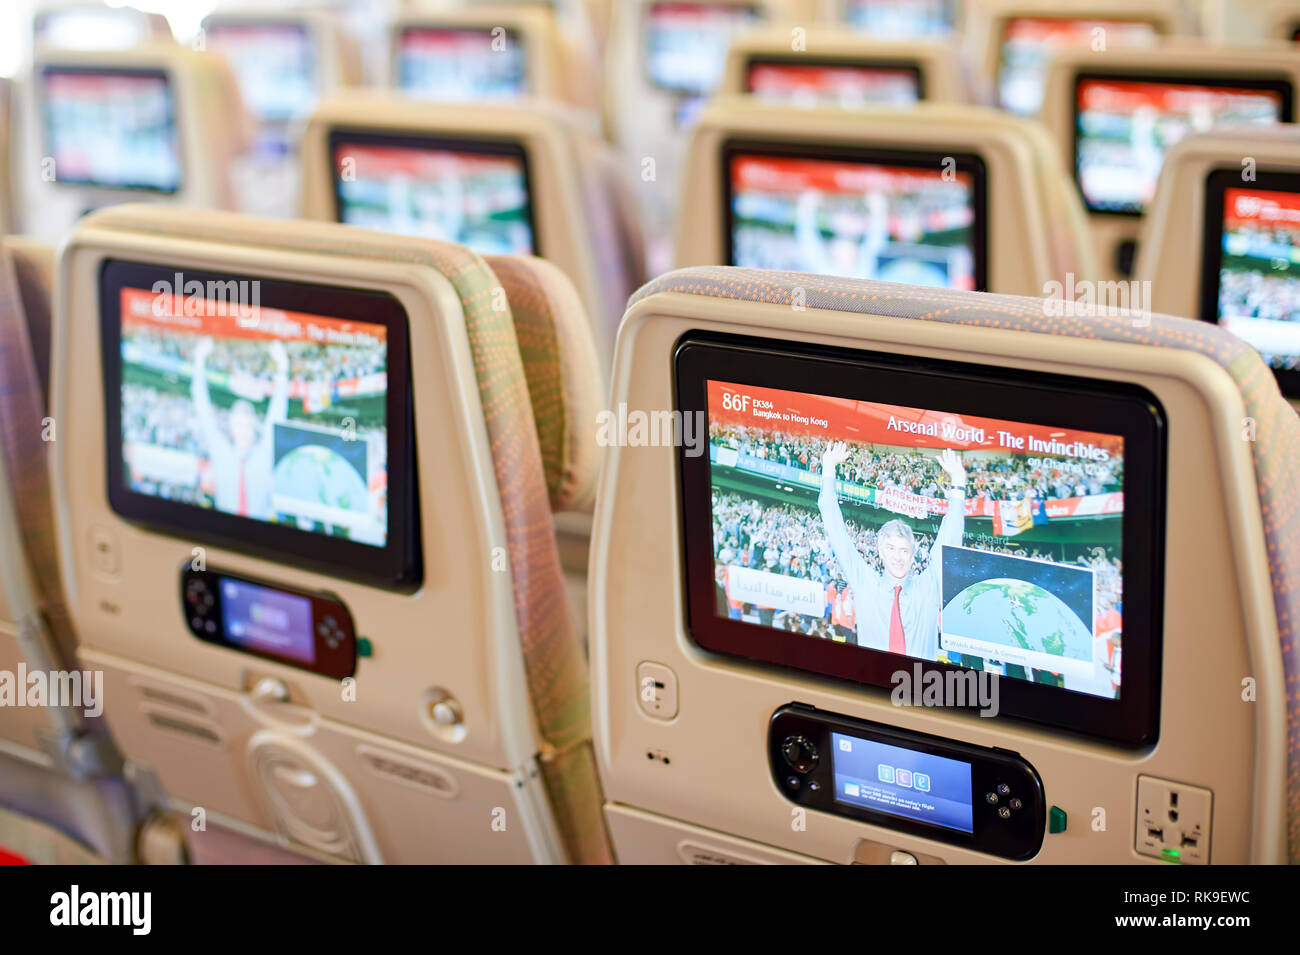 BANGKOK, THAILAND - SEPTEMBER 09, 2015: inside of Emirates Airbus A380. The Airbus A380 is a double-deck, wide-body, four-engine jet airliner manufact Stock Photo